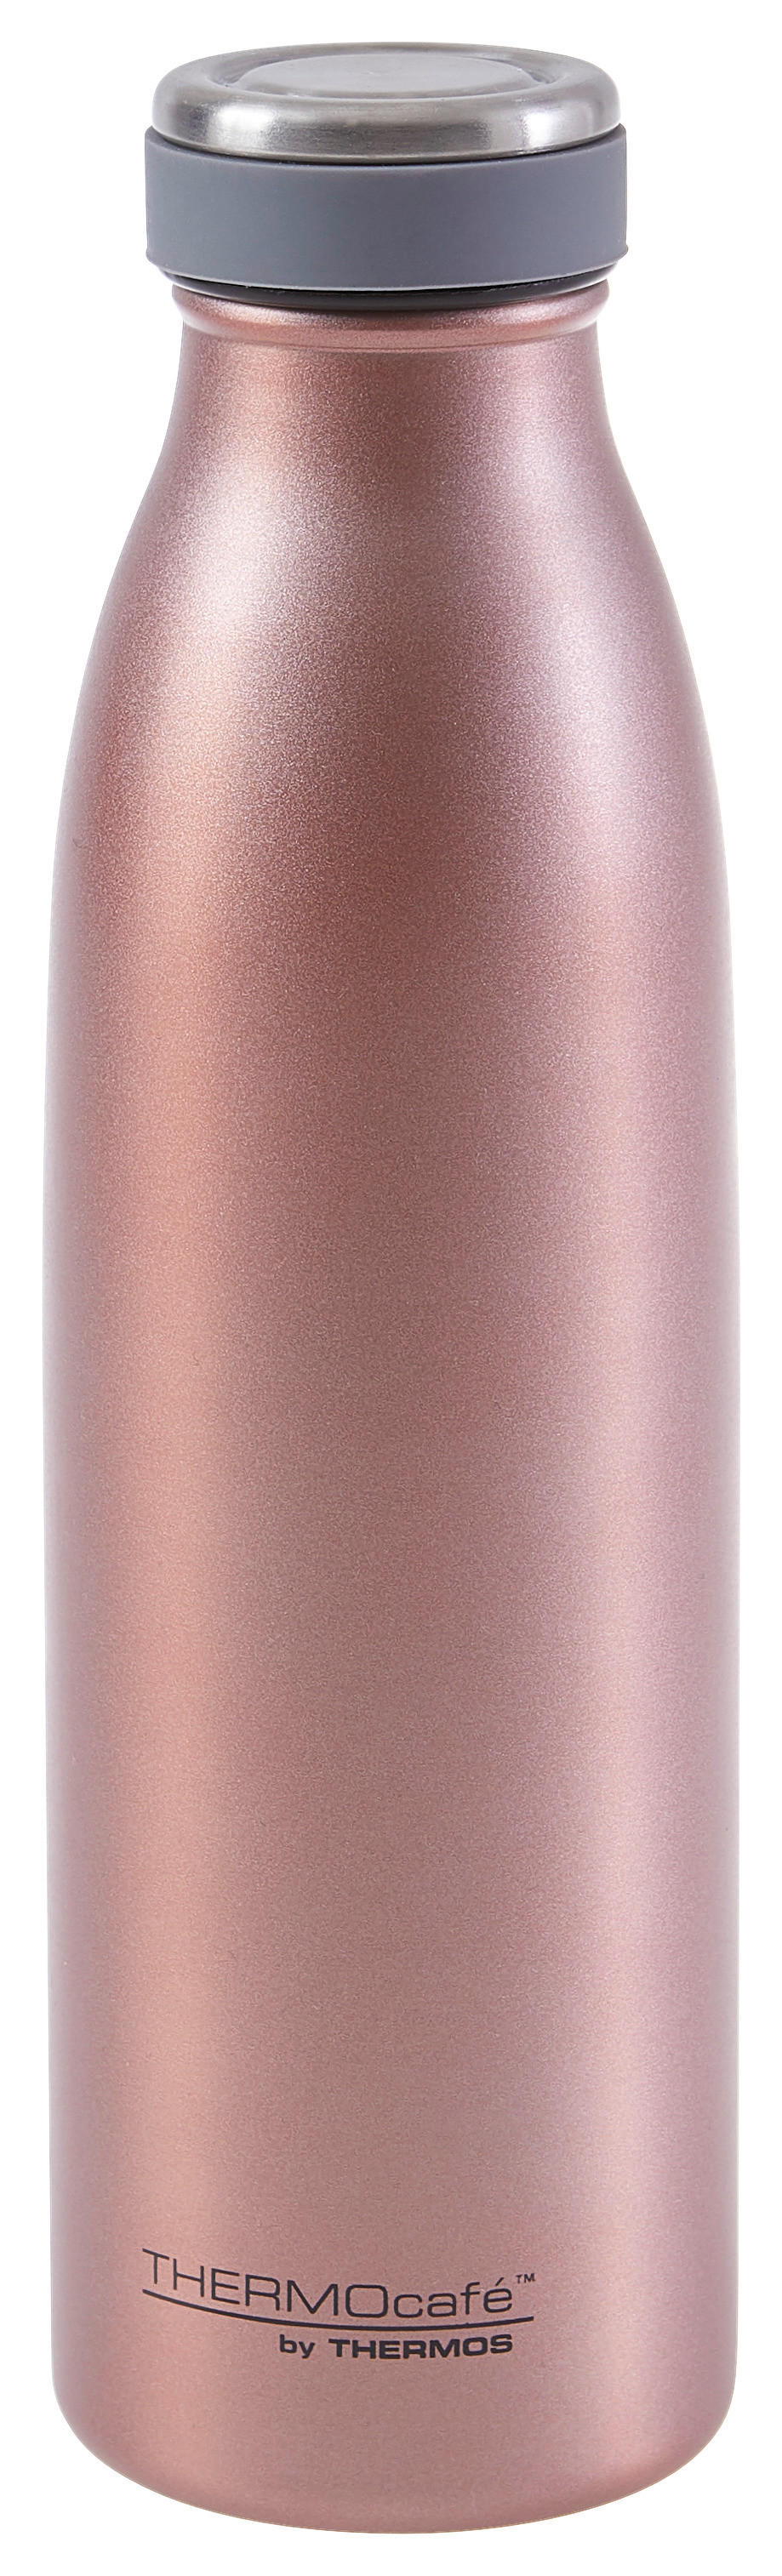 ISOLIERFLASCHE TC Bottle 0,5 L  - Rosa, Basics, Metall (0,5l) - Thermos